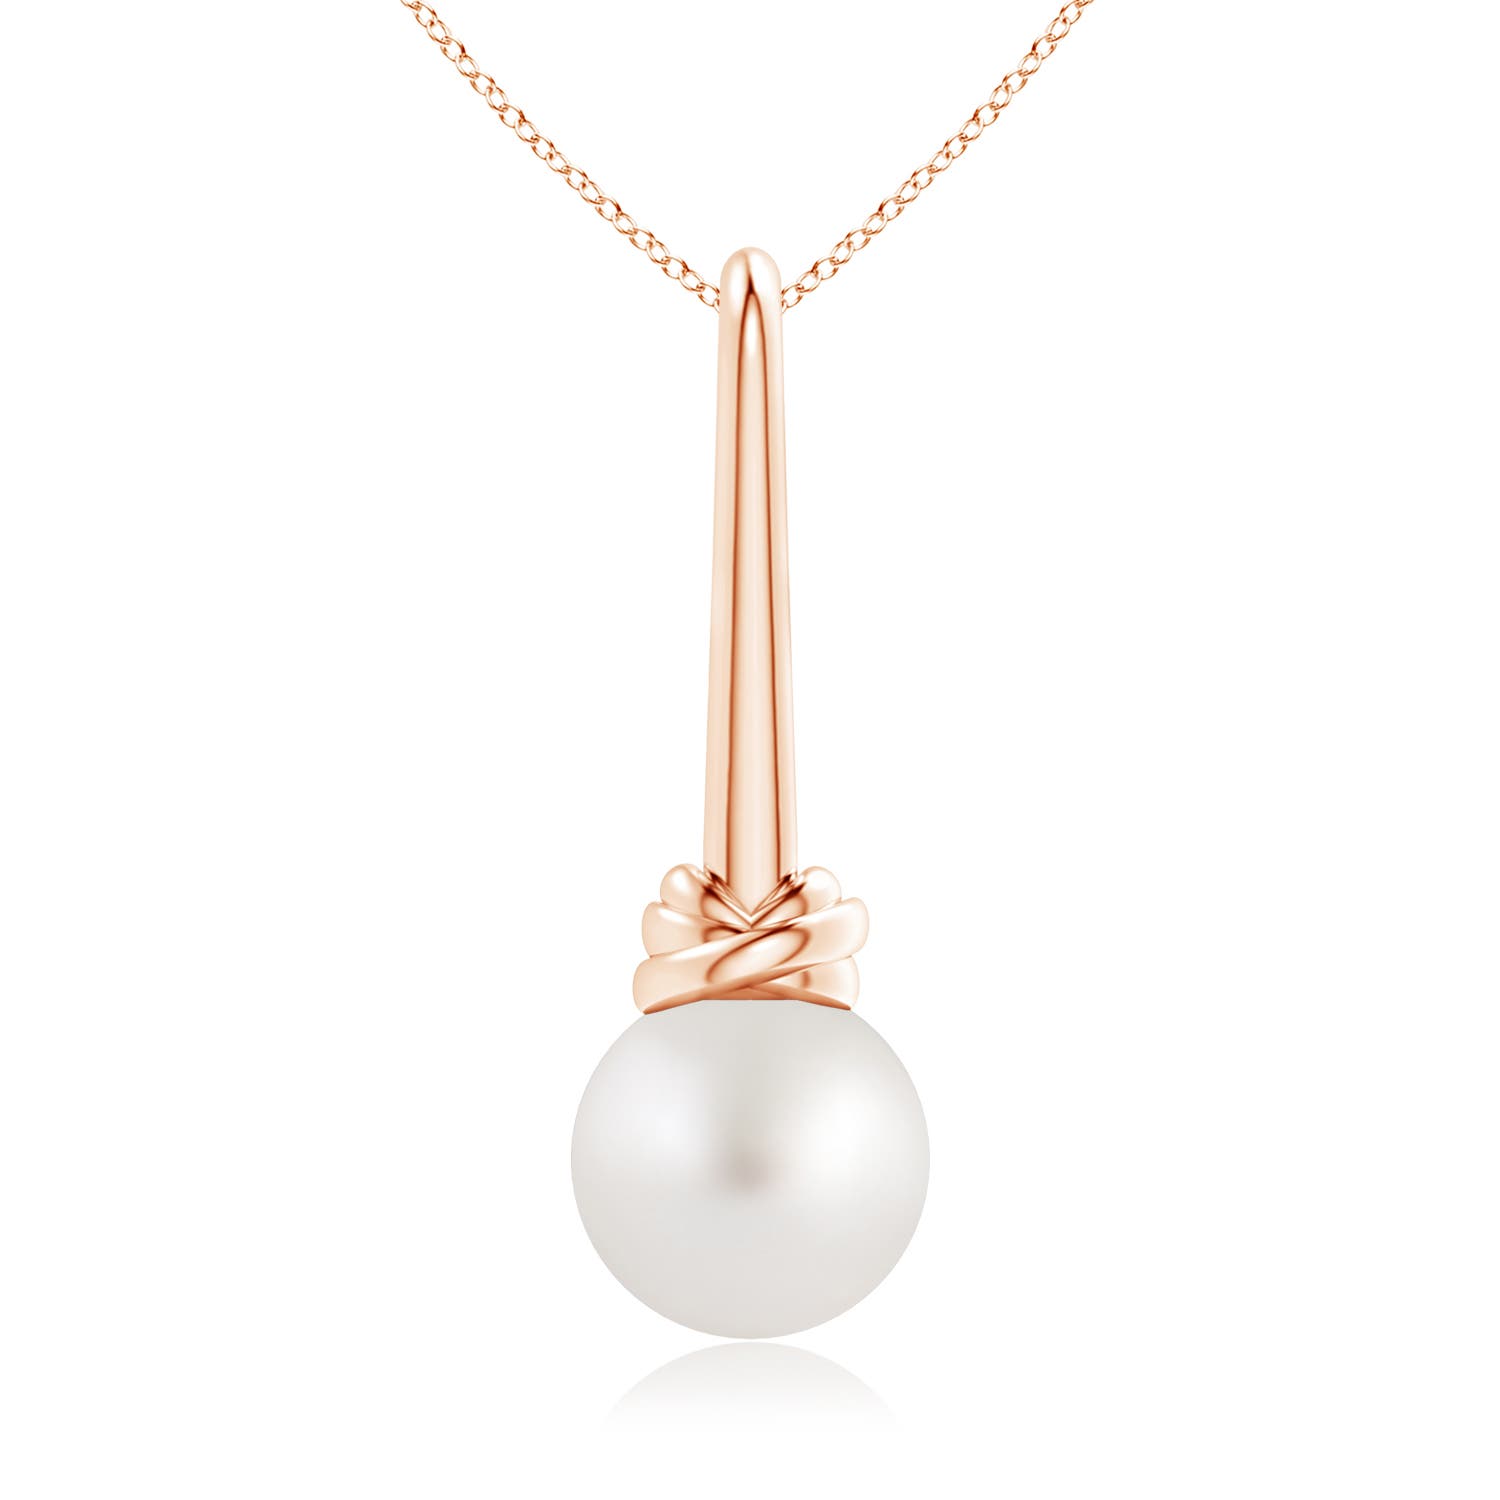 AA - South Sea Cultured Pearl / 7.2 CT / 14 KT Rose Gold